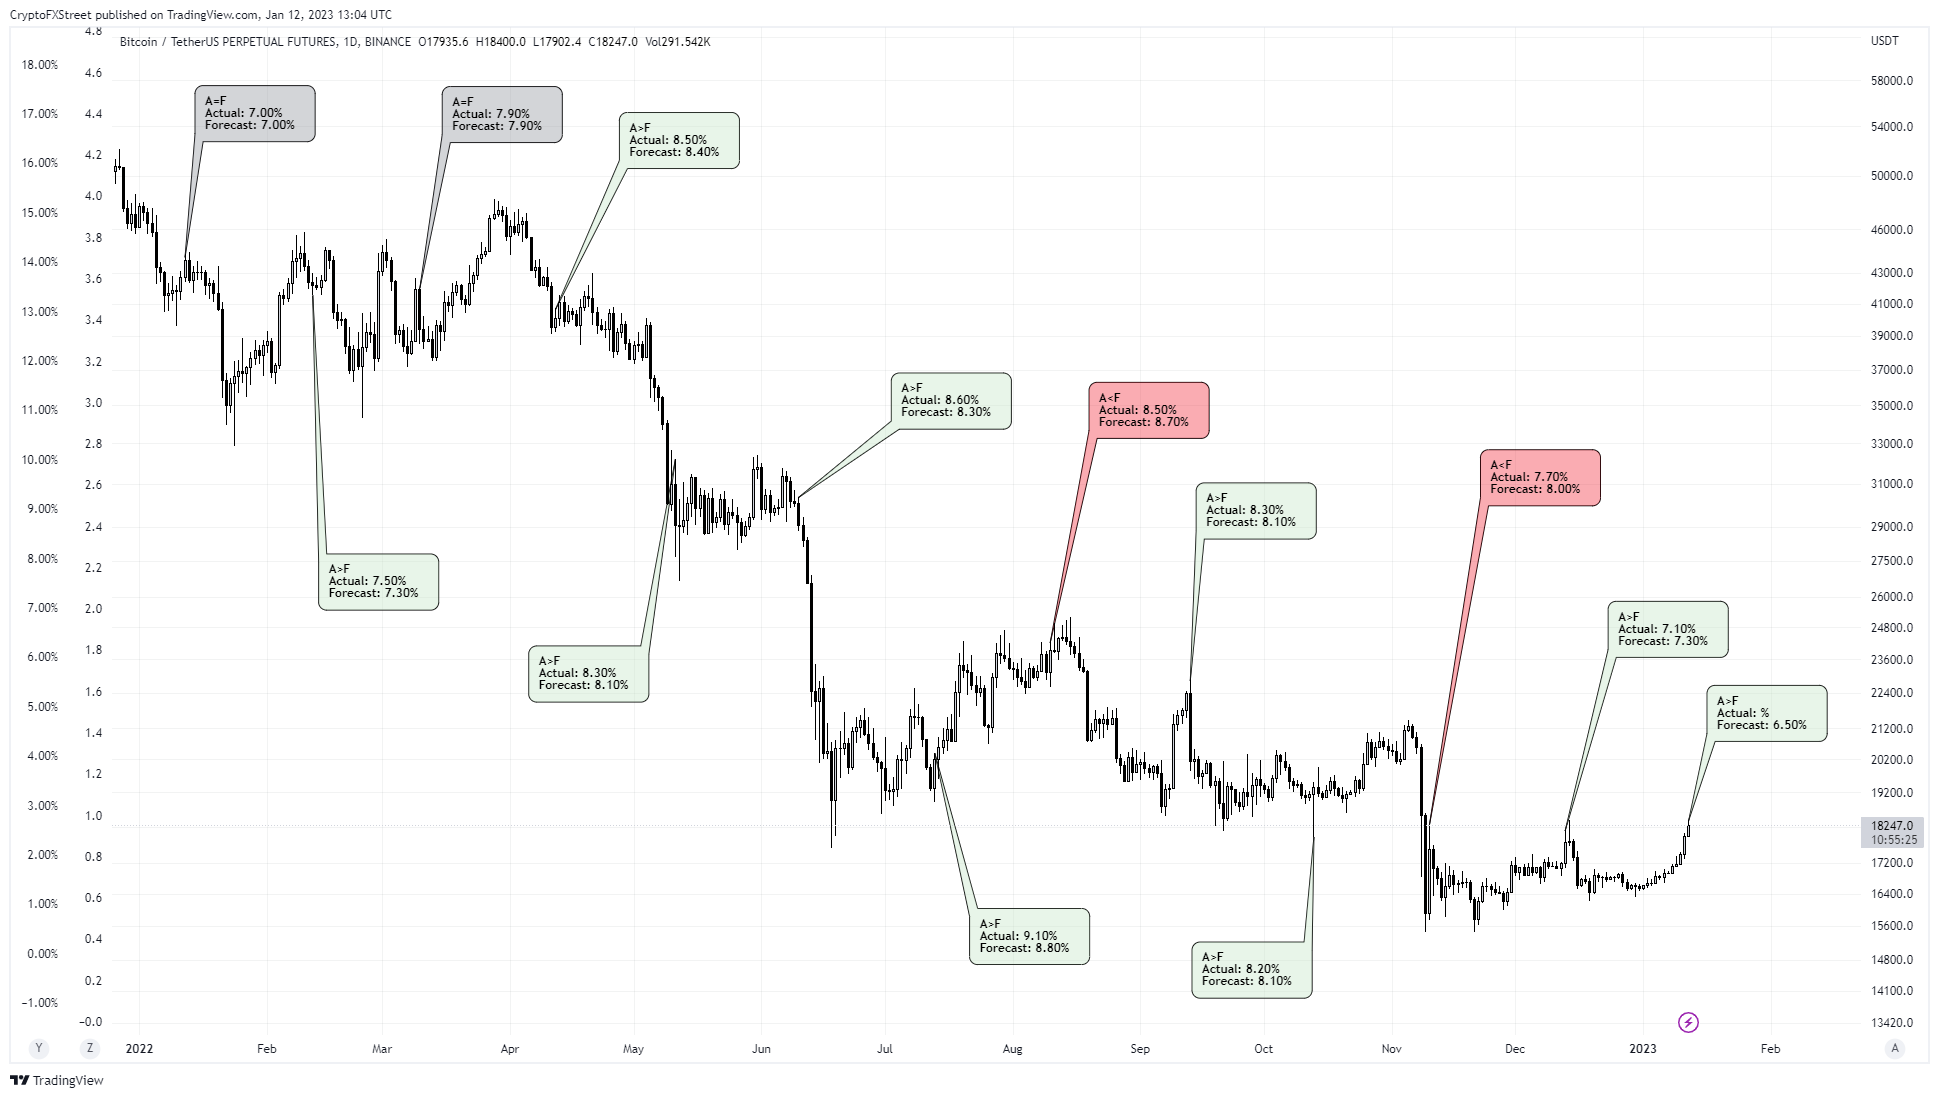 Bitcoin price reaction to relationship between Actual and Forecasted CPI readings